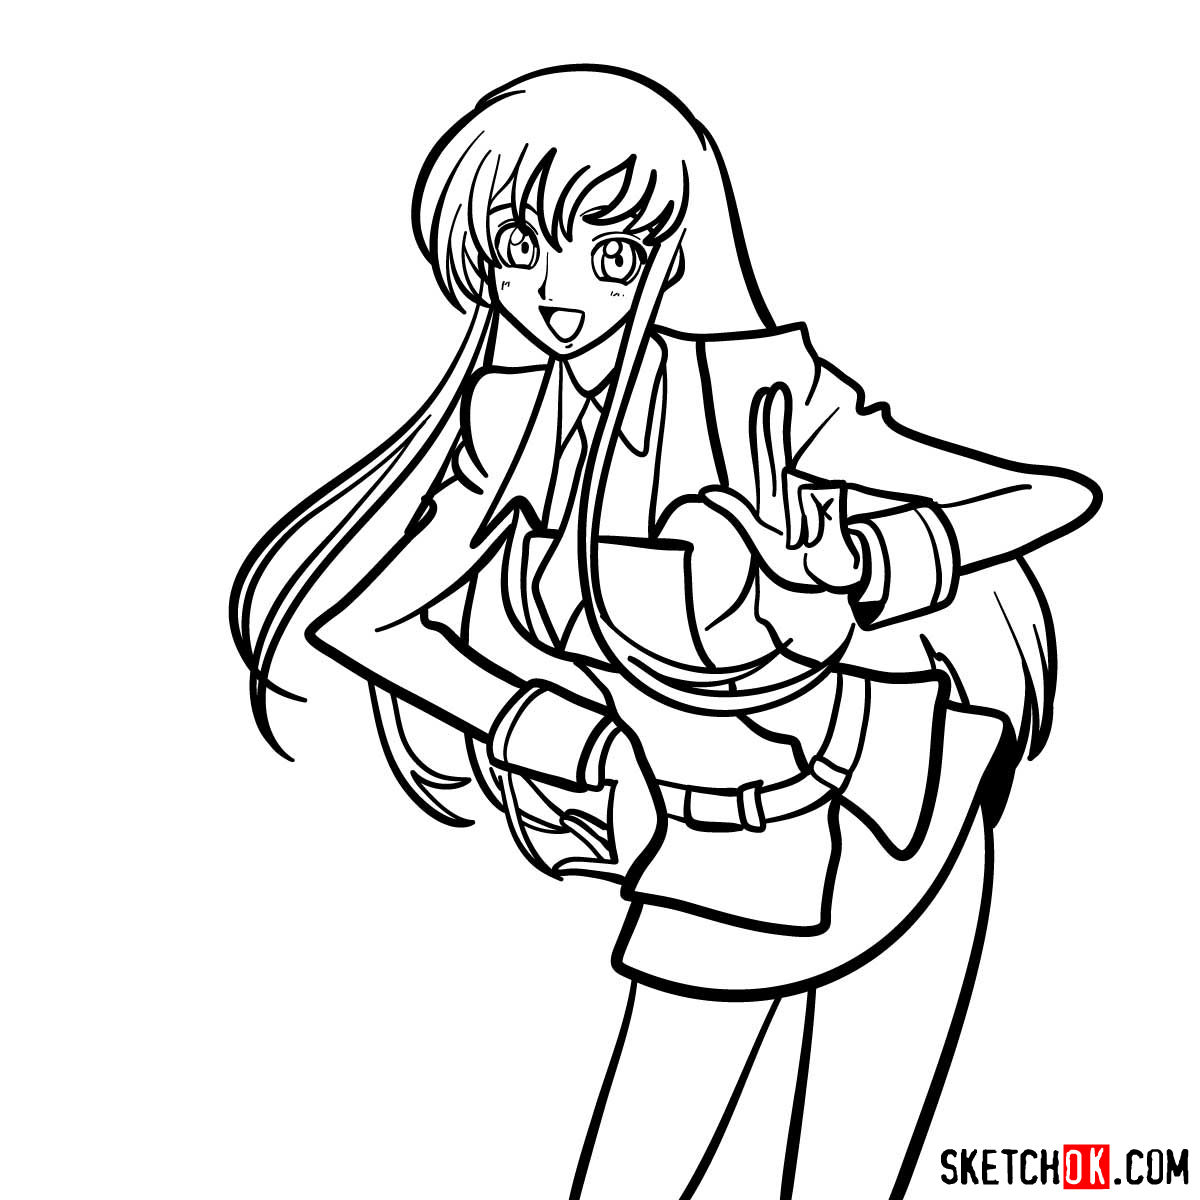 15 steps drawing guide of Shirley Fenette (Code Geass) - step 14